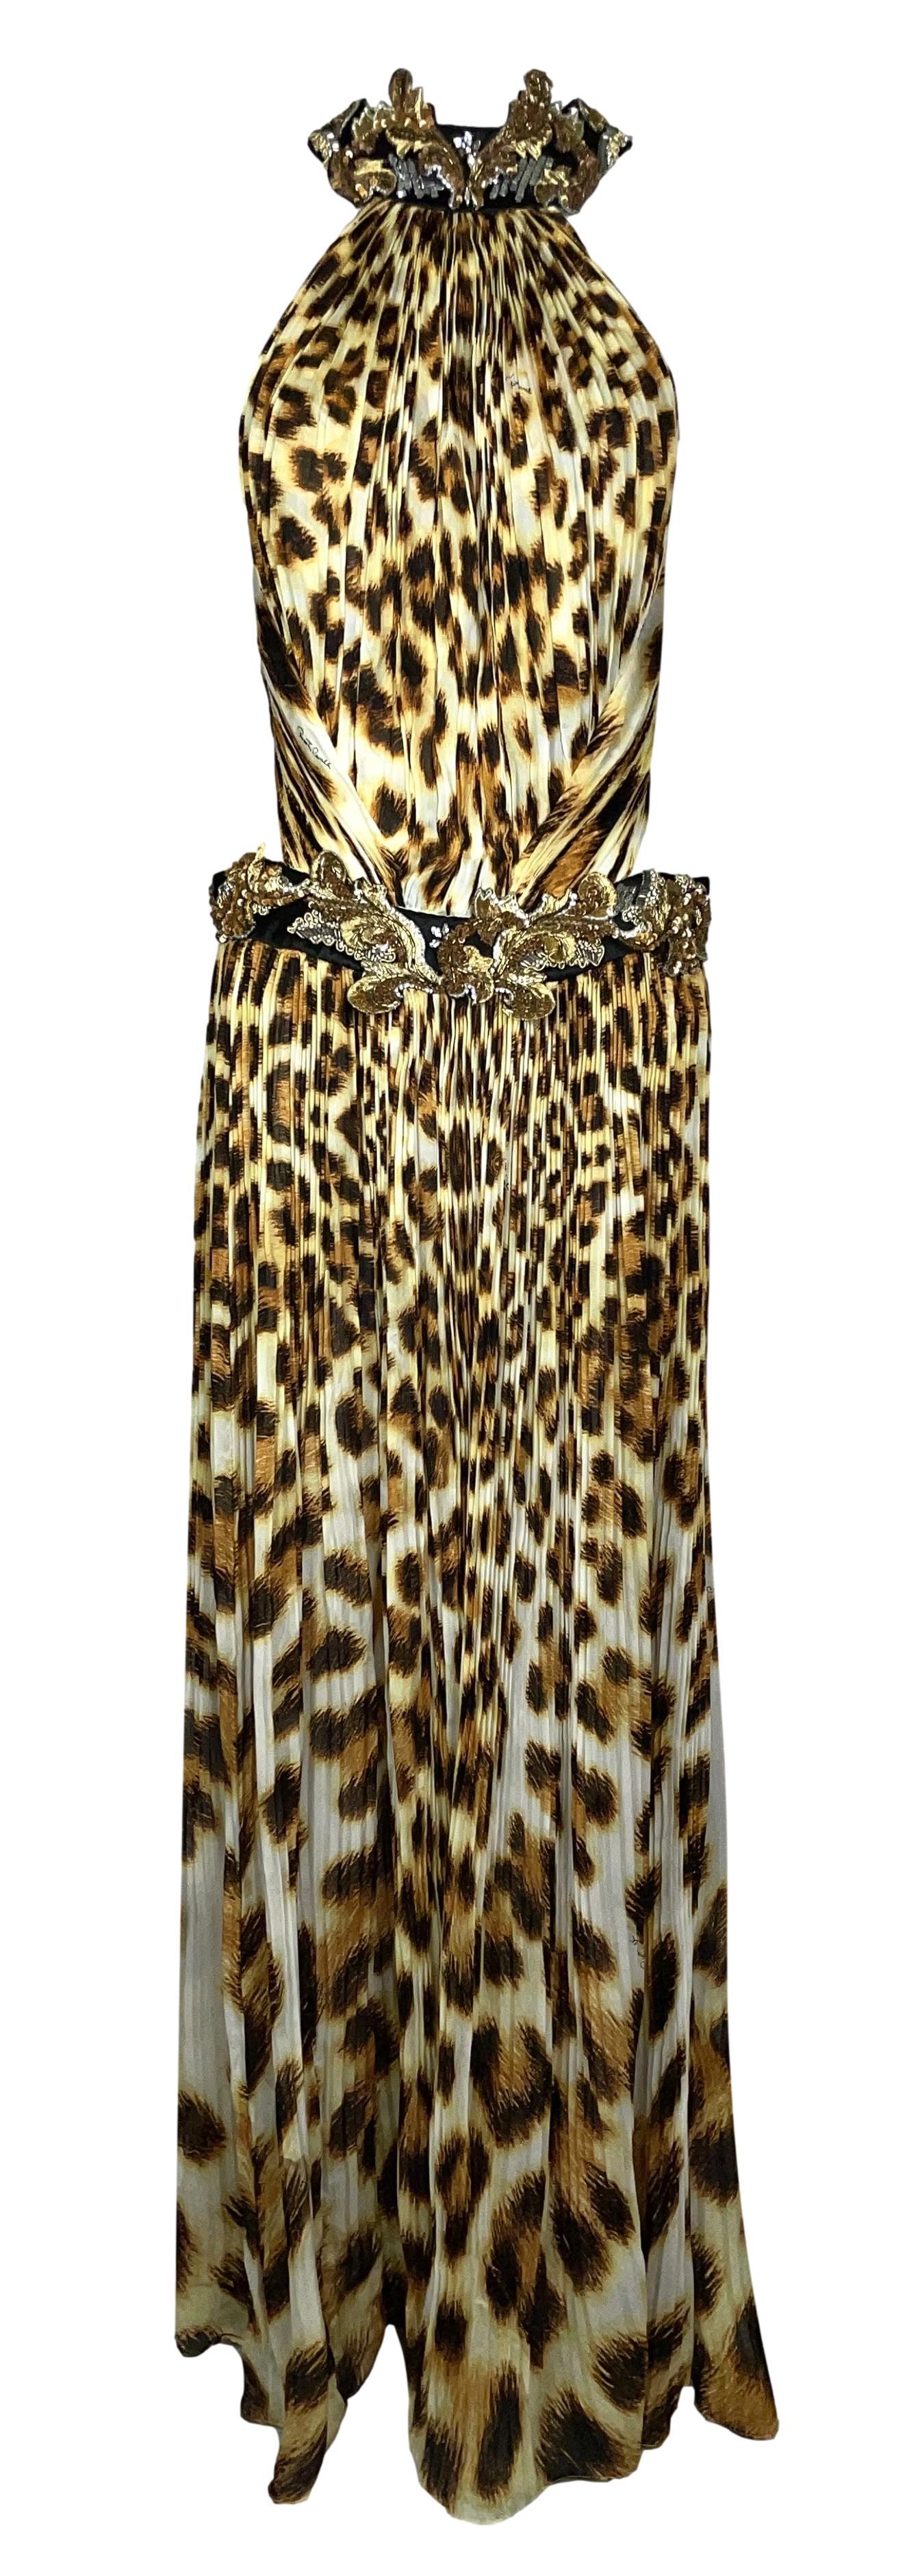 **THANK YOU FOR SHOPPING WITH MES DEUX FILLES**

DESIGNER: S/S 2007 Roberto Cavalli Runway
CONDITION: Fair- has some minor flaws hidden in the print and pleats and marks inside by label
FABRIC: Silk
COUNTRY MADE: Italy
SIZE: No size tag- please